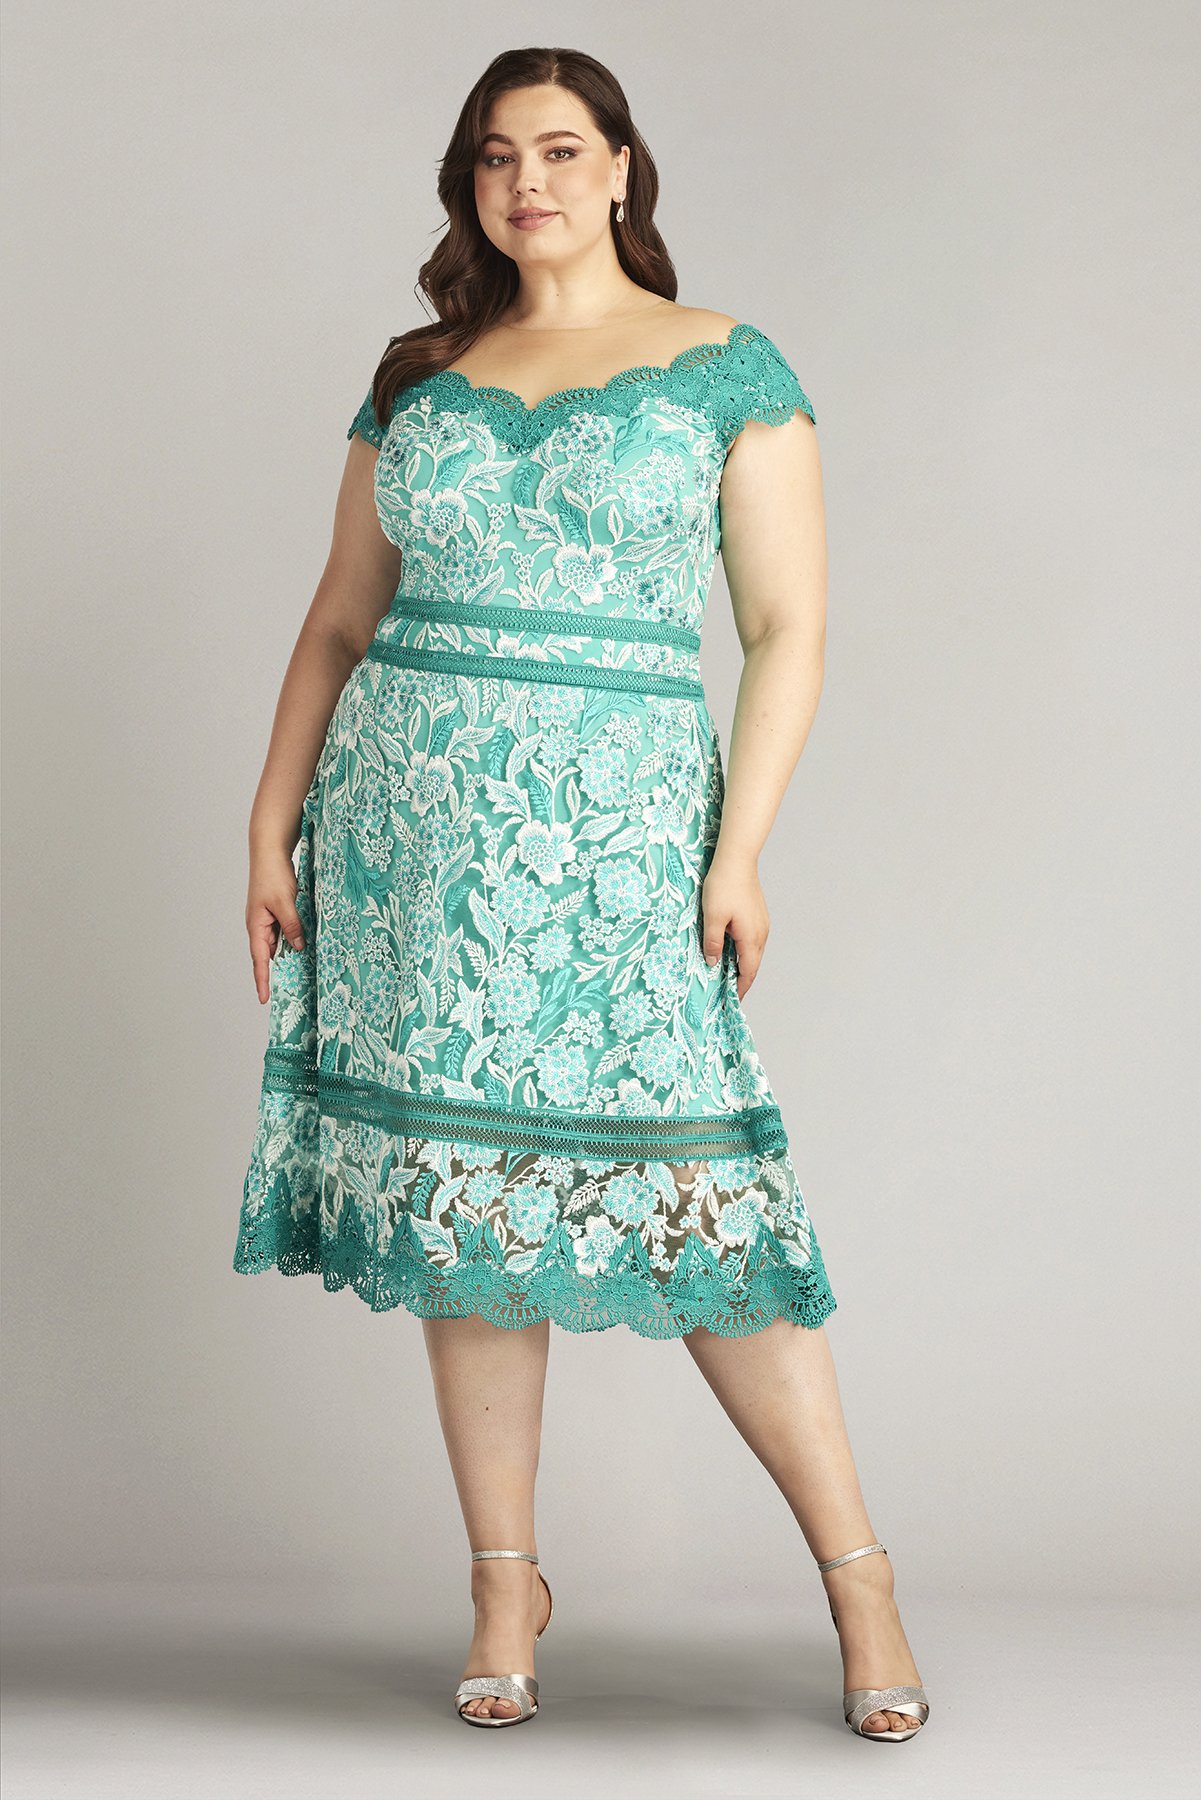 Nance Double Banded Scalloped Lace Dress - PLUS SIZE